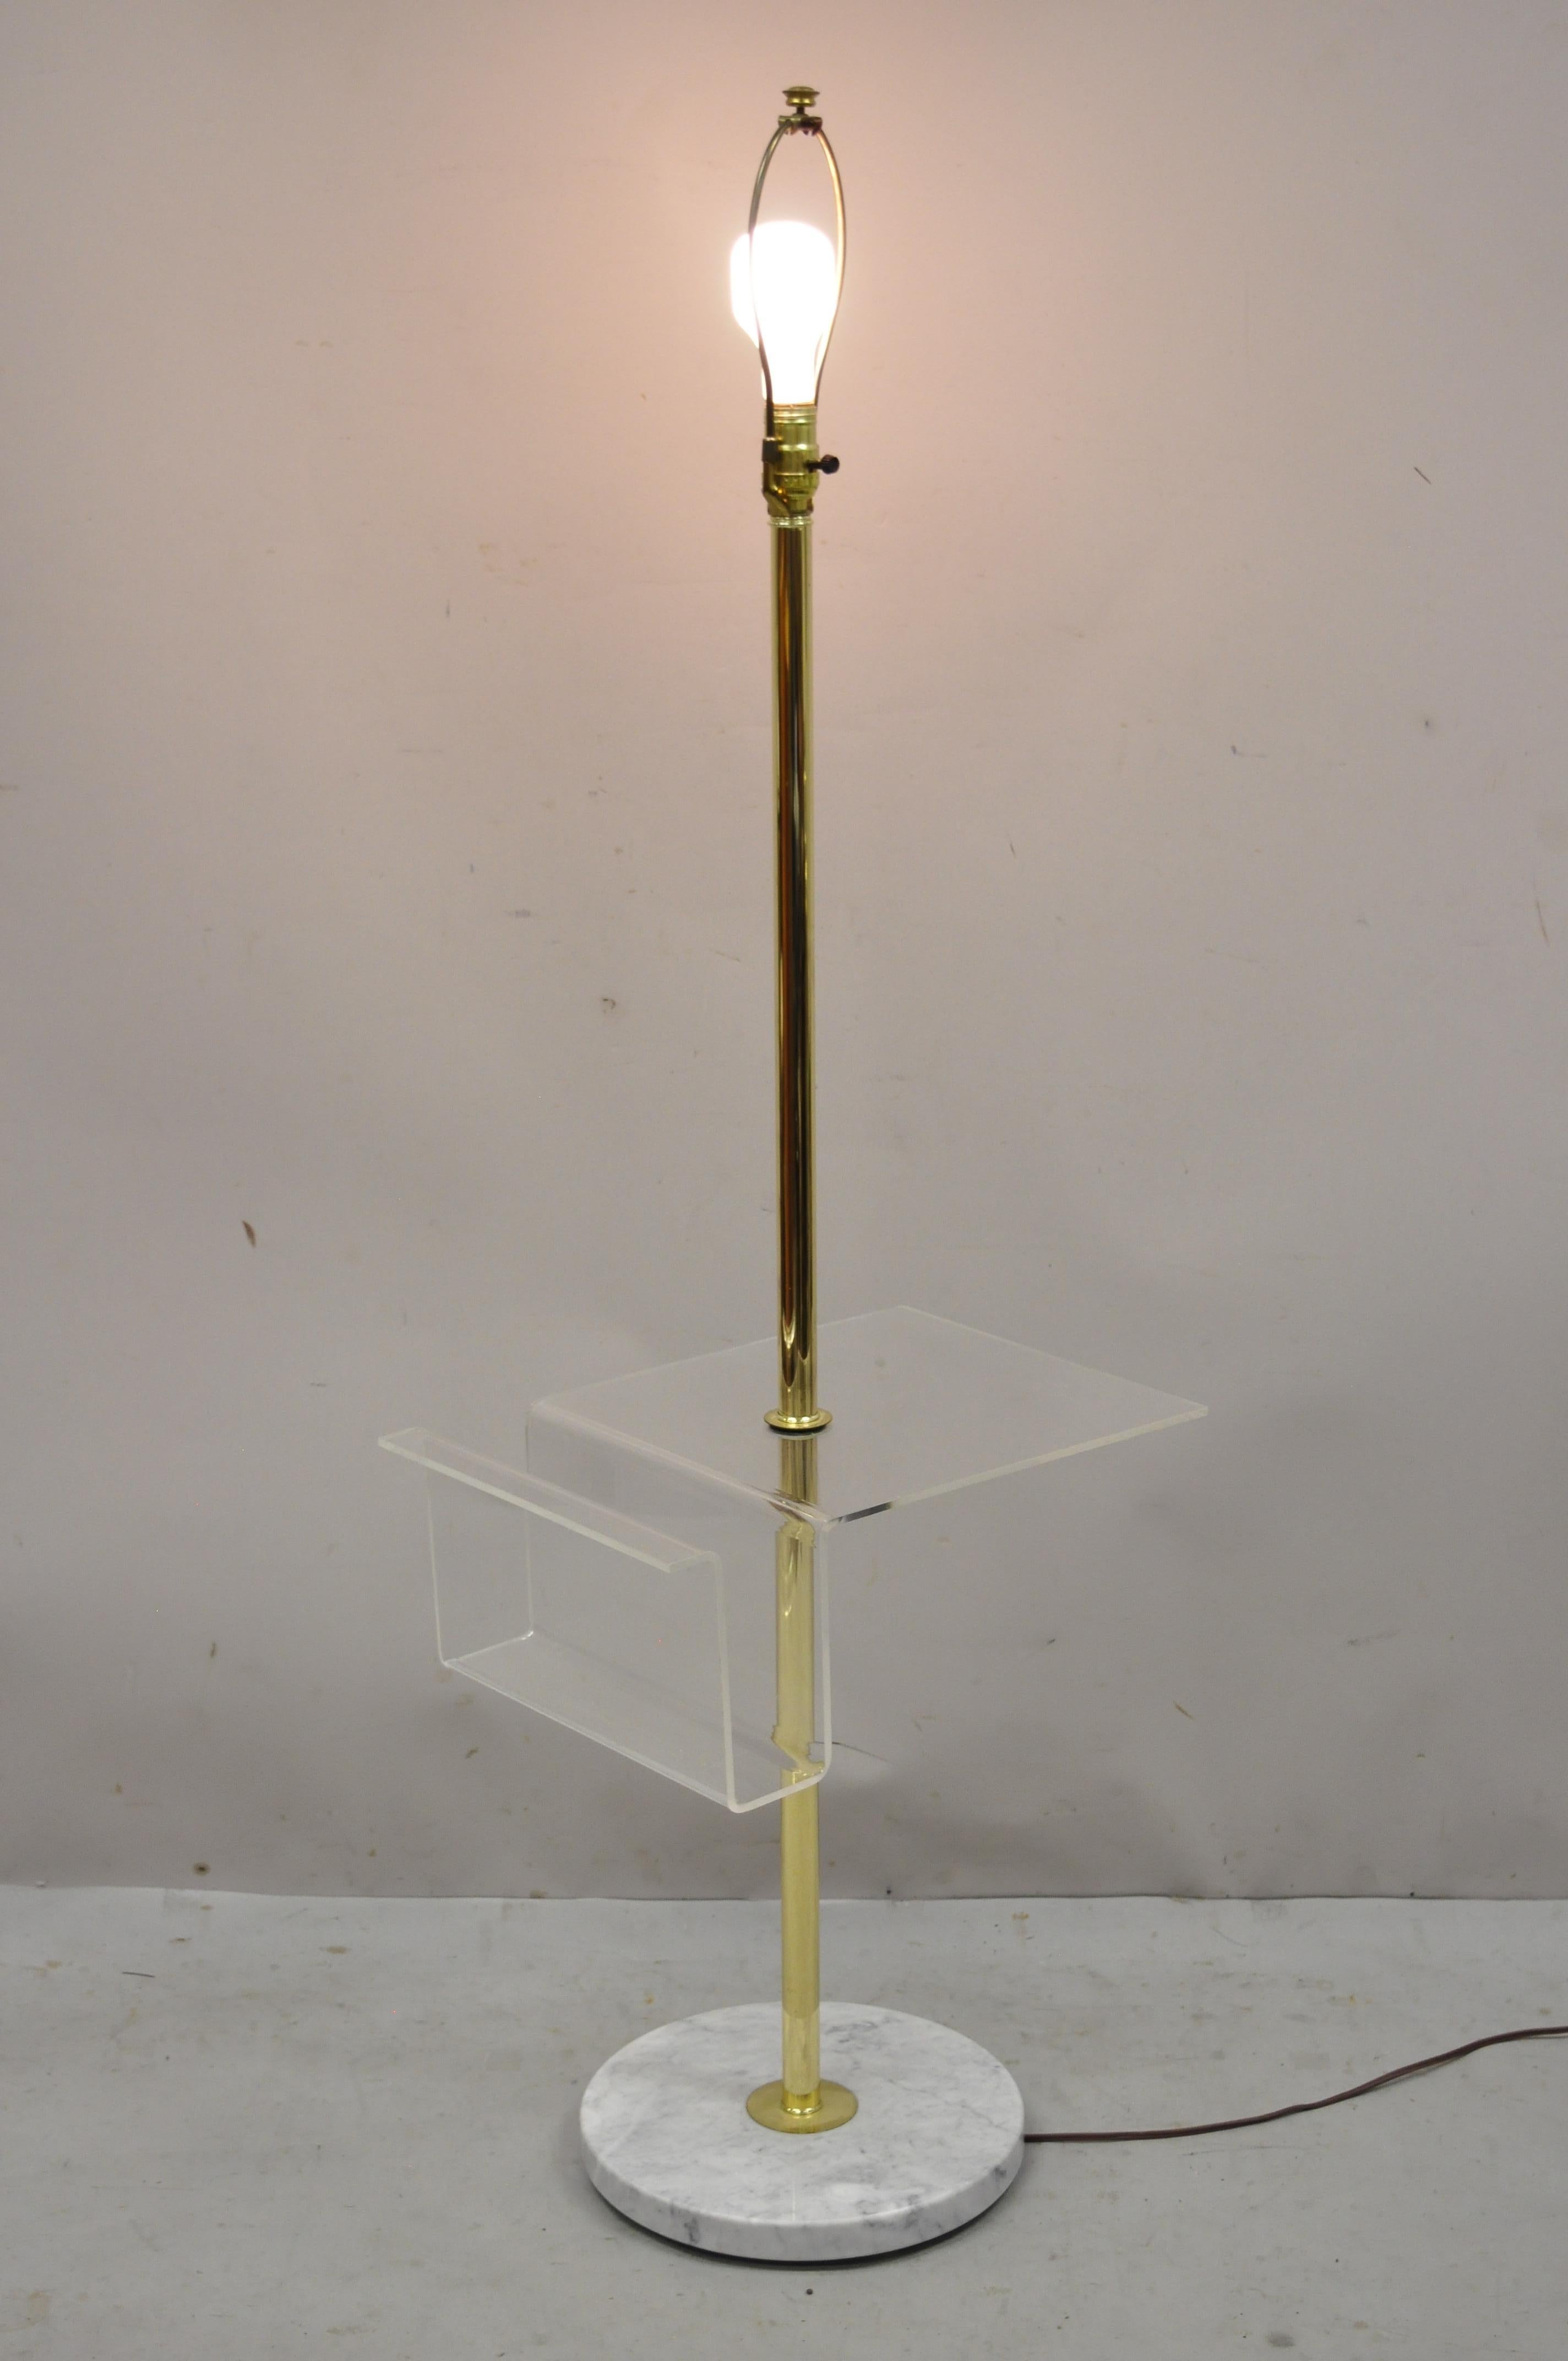 Italian Mid-Century Modern brass pole floor lamp with marble base and lucite magazine rack. Item features clear lucite magazine rack table surface, brass shaft, round white marble base, very nice vintage item, clean modernist lines, great style and